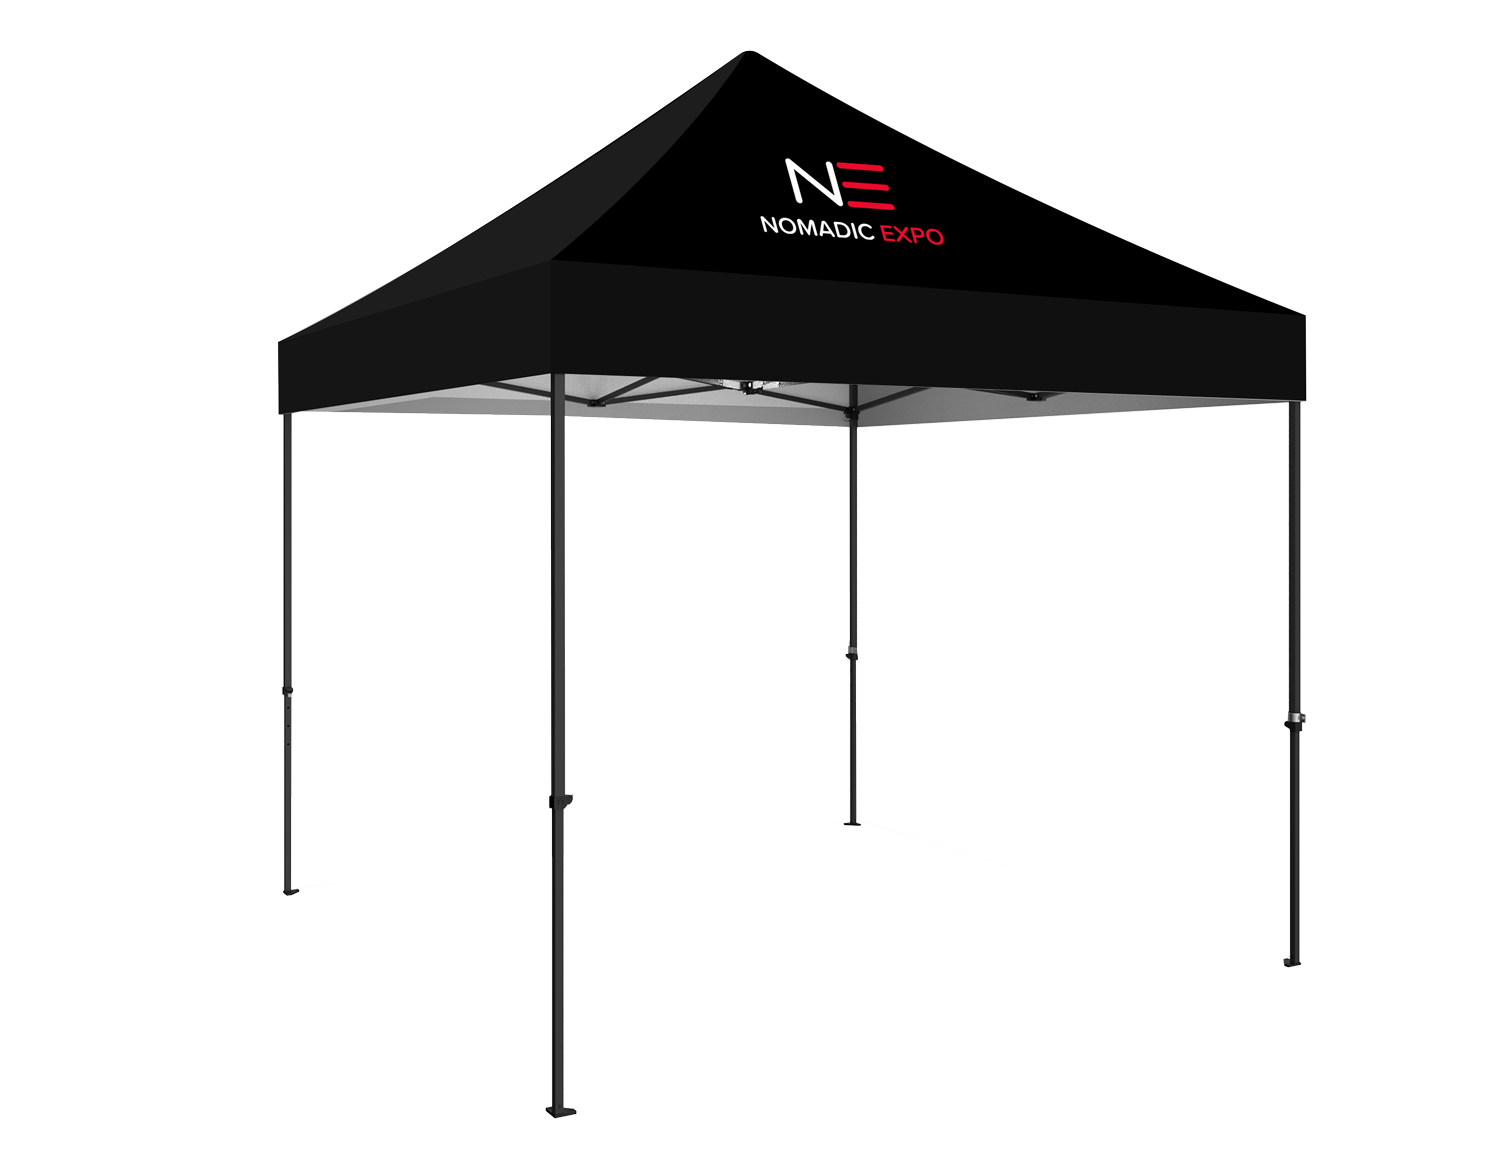 Promotional tents and umbrellas